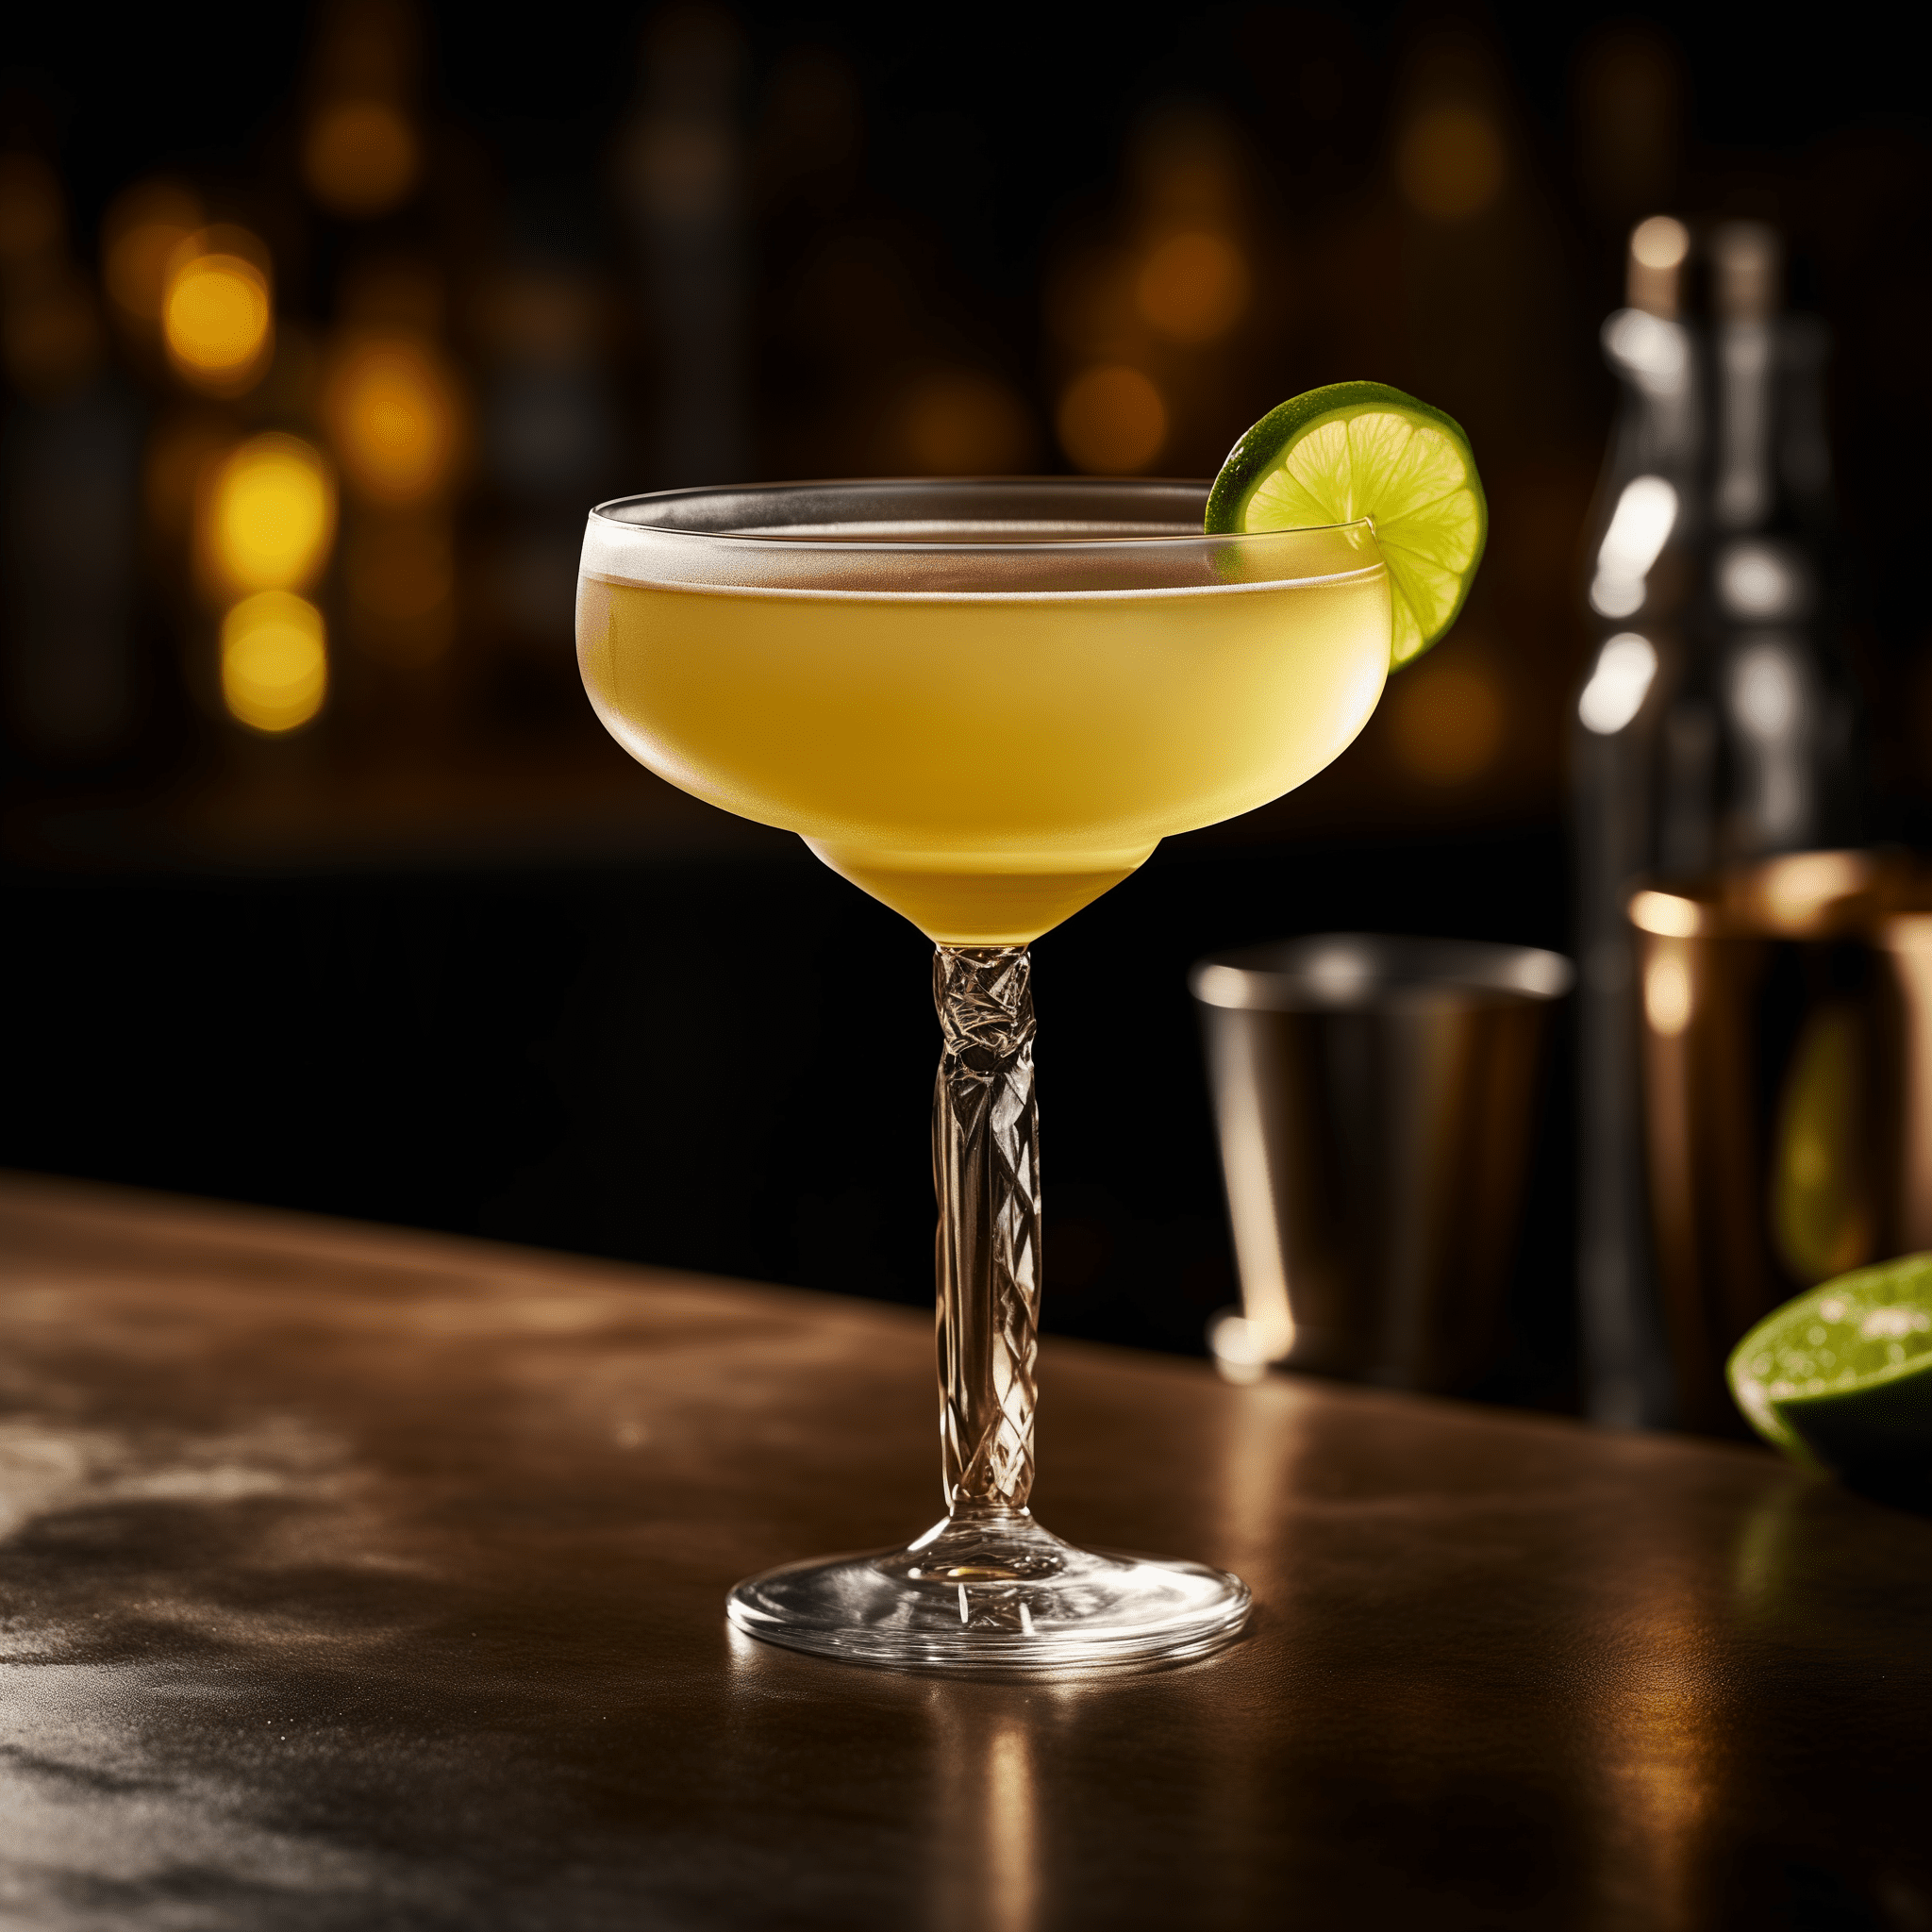 Whiskey Gimlet Cocktail Recipe - The Whiskey Gimlet is a harmonious blend of sour and sweet, with the robustness of whiskey shining through. It's refreshing, slightly tart, and has a smooth finish.